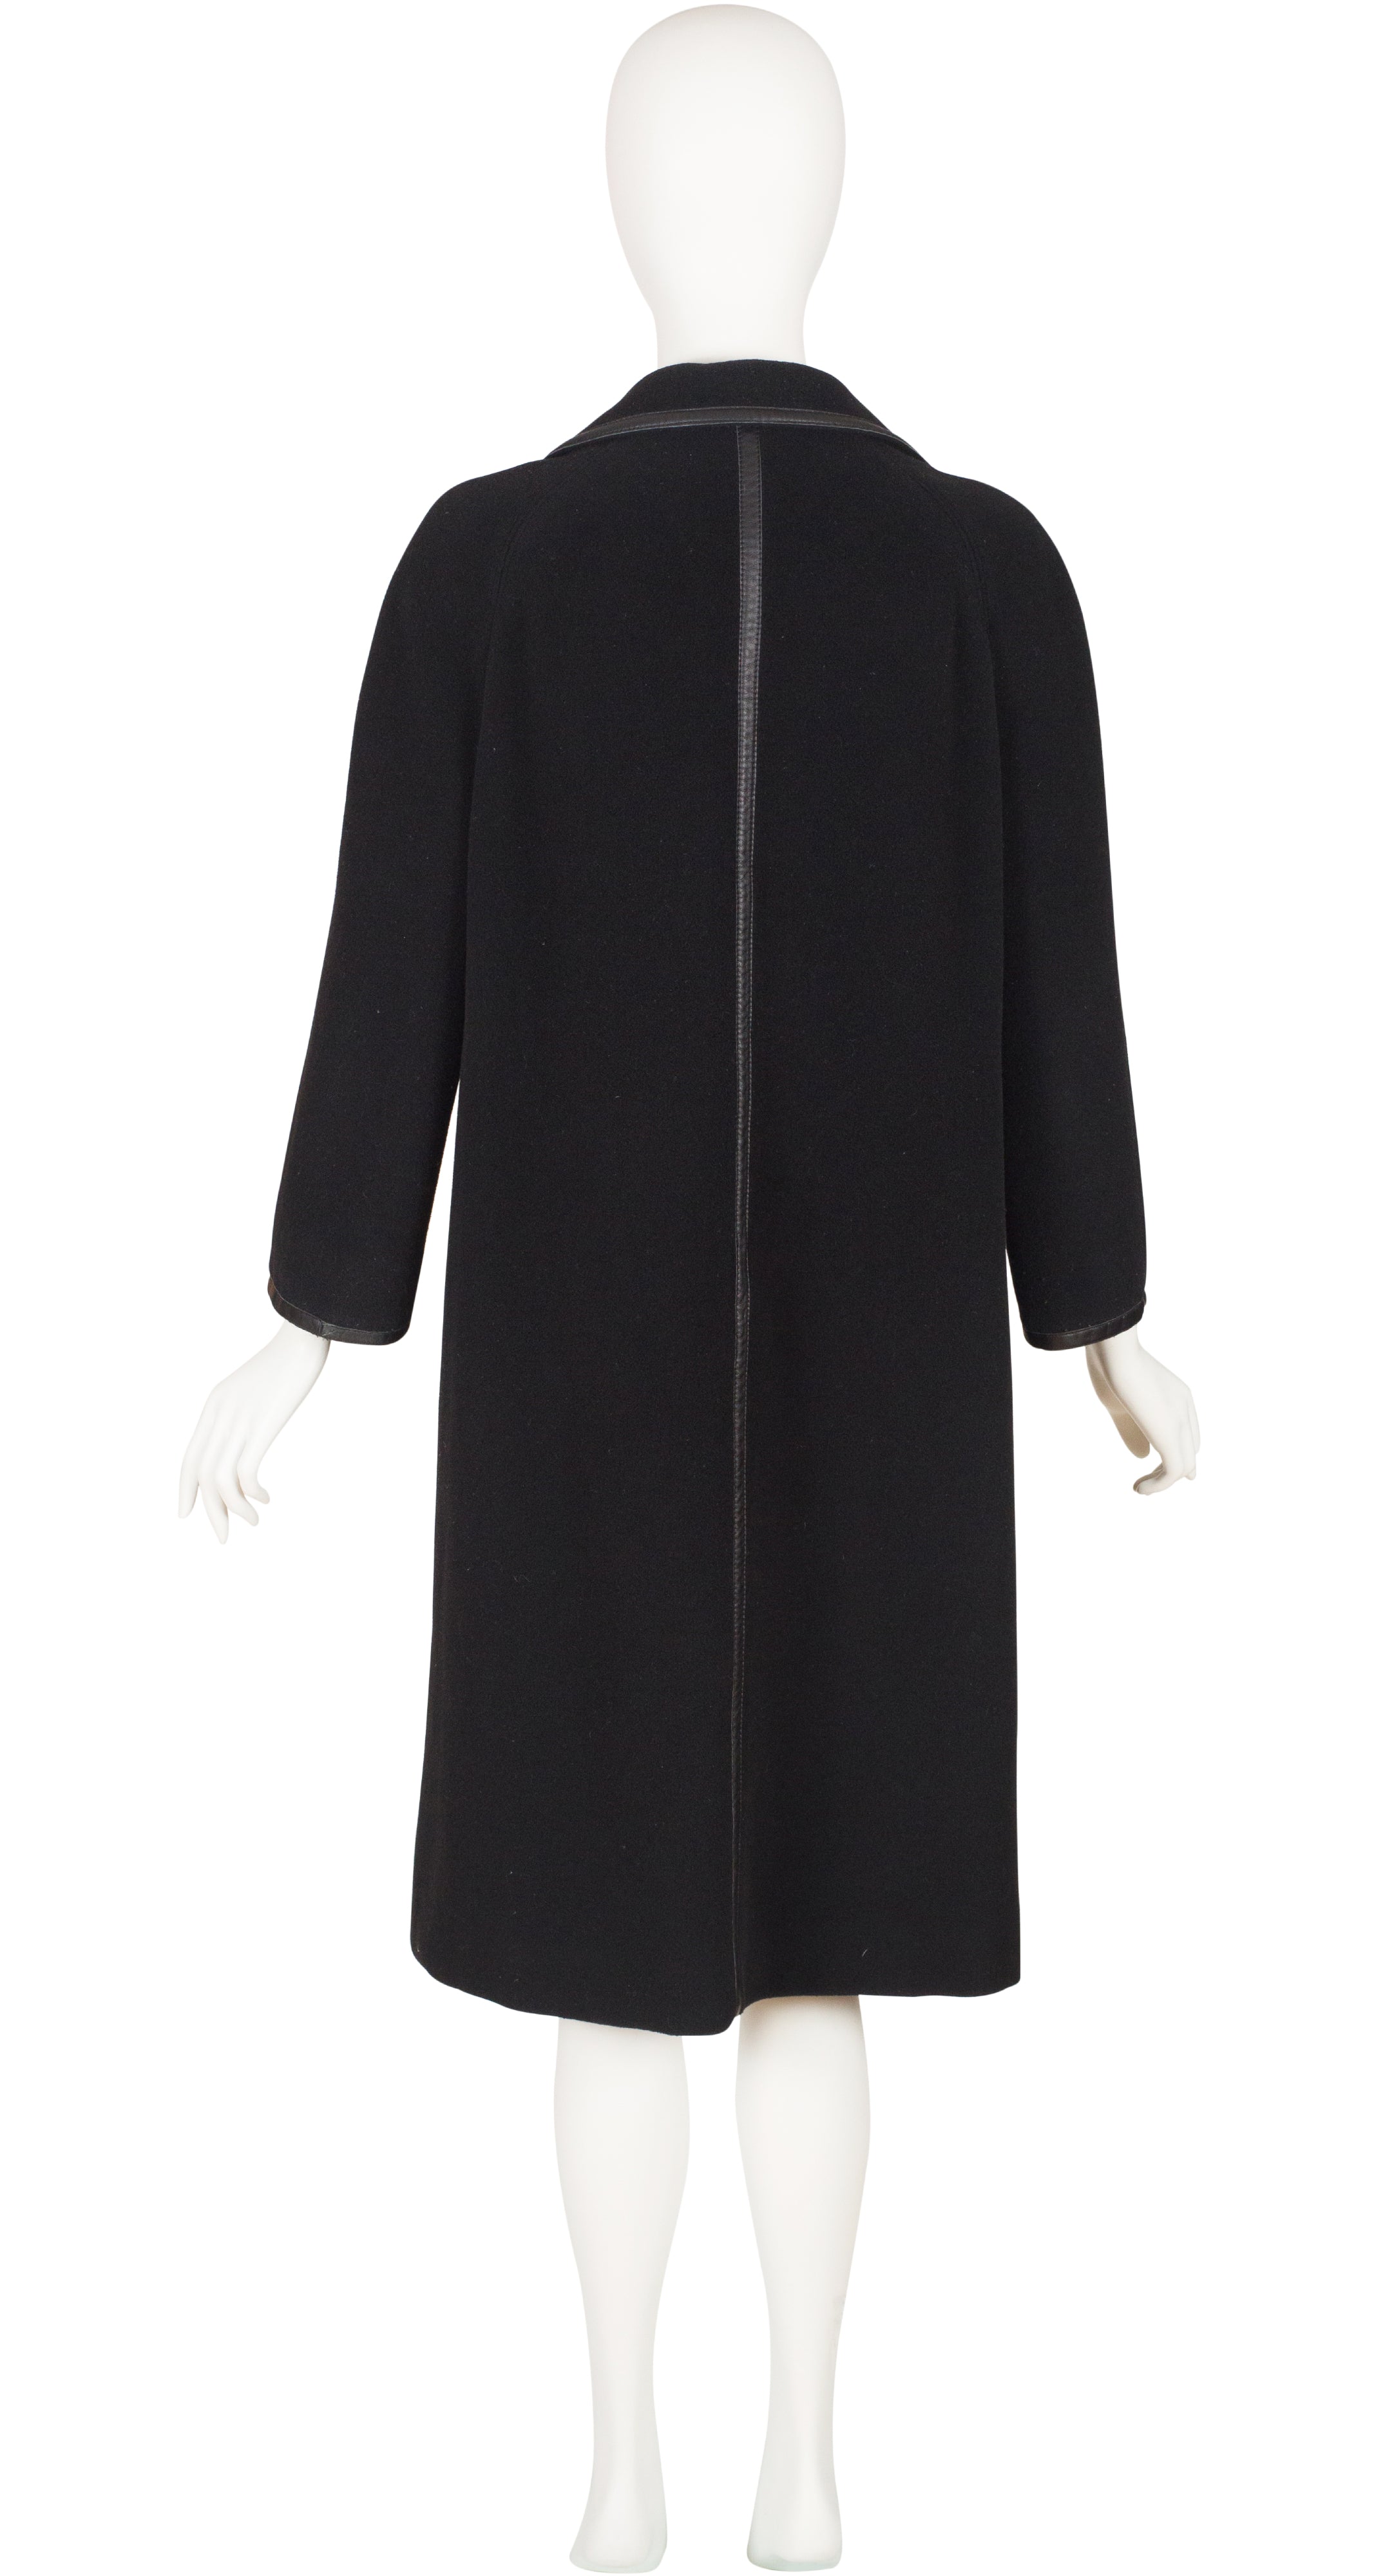 Louis Féraud 1970s Black Wool Leather Trimmed Collared Coat ...